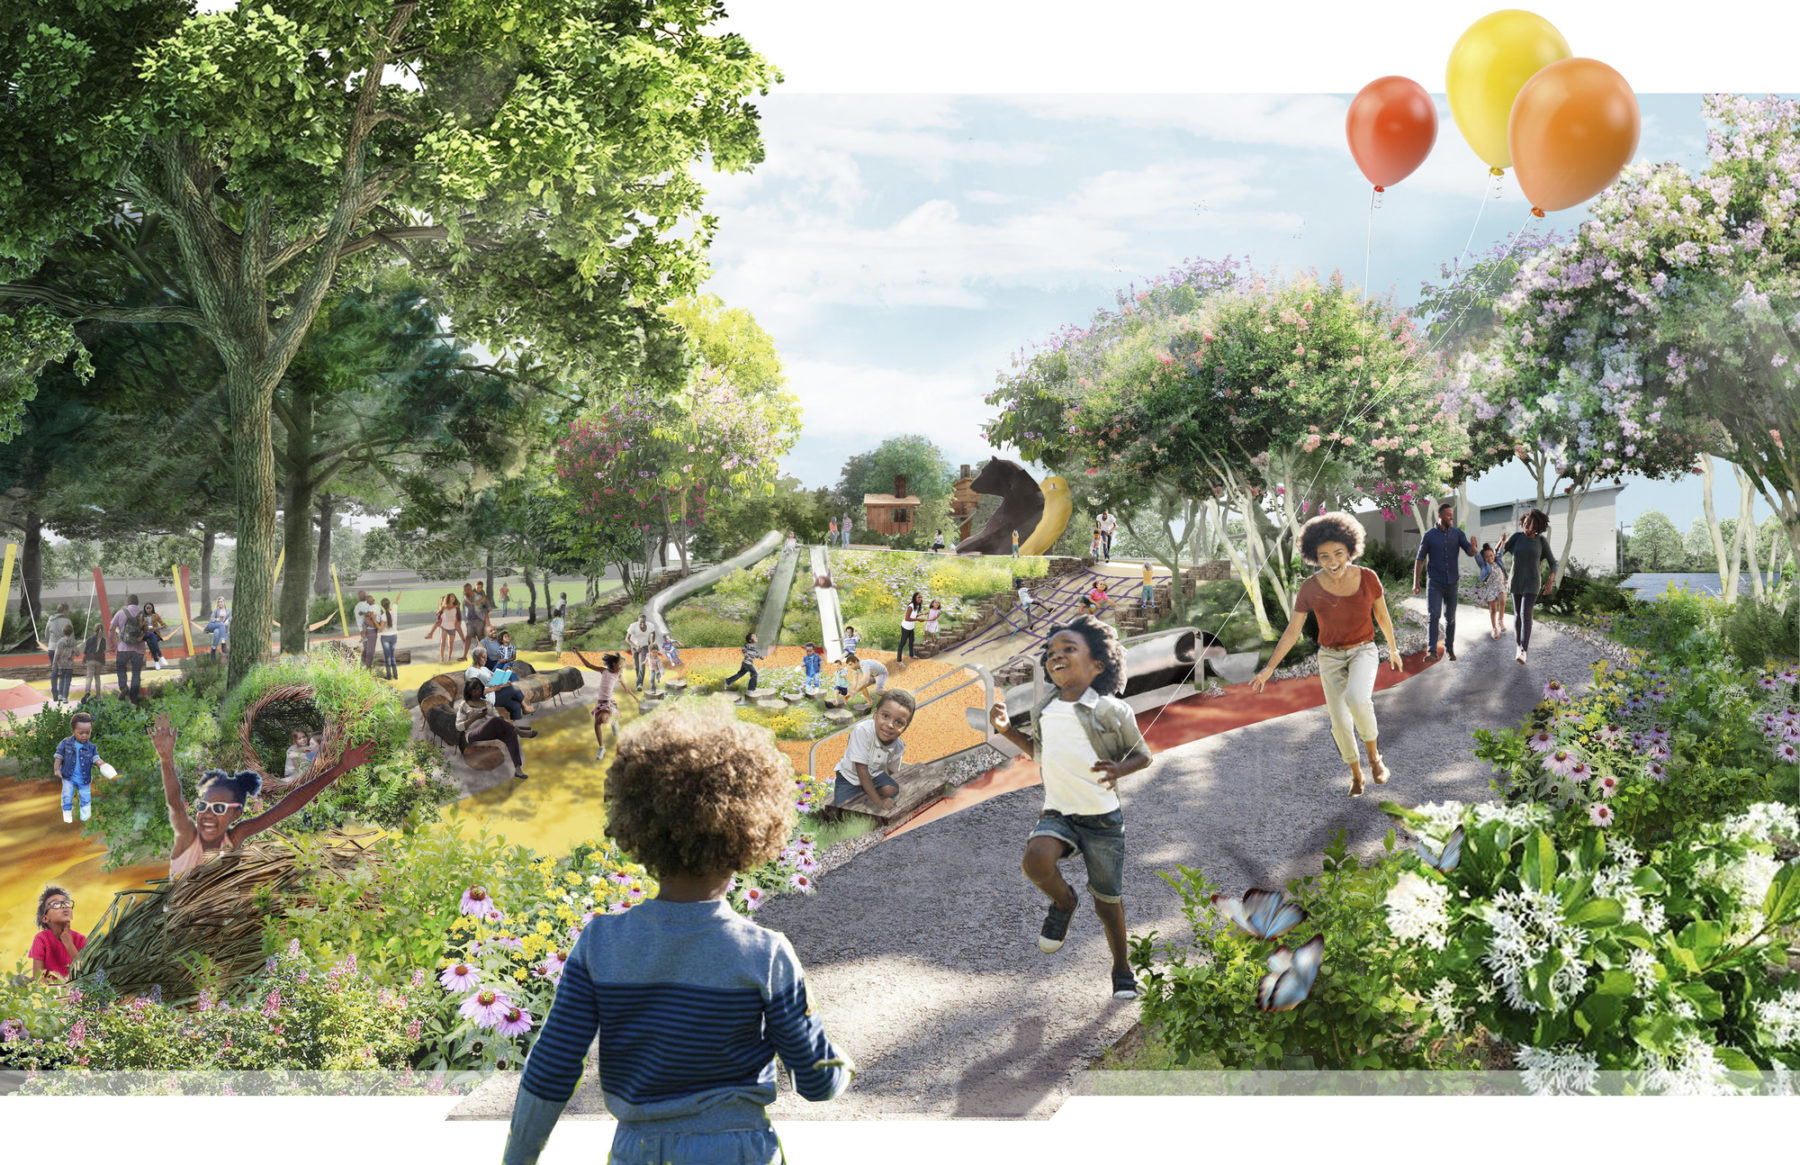 Rendering of the adventure play component of the park. Children run along the path, one young boy is carrying three balloons